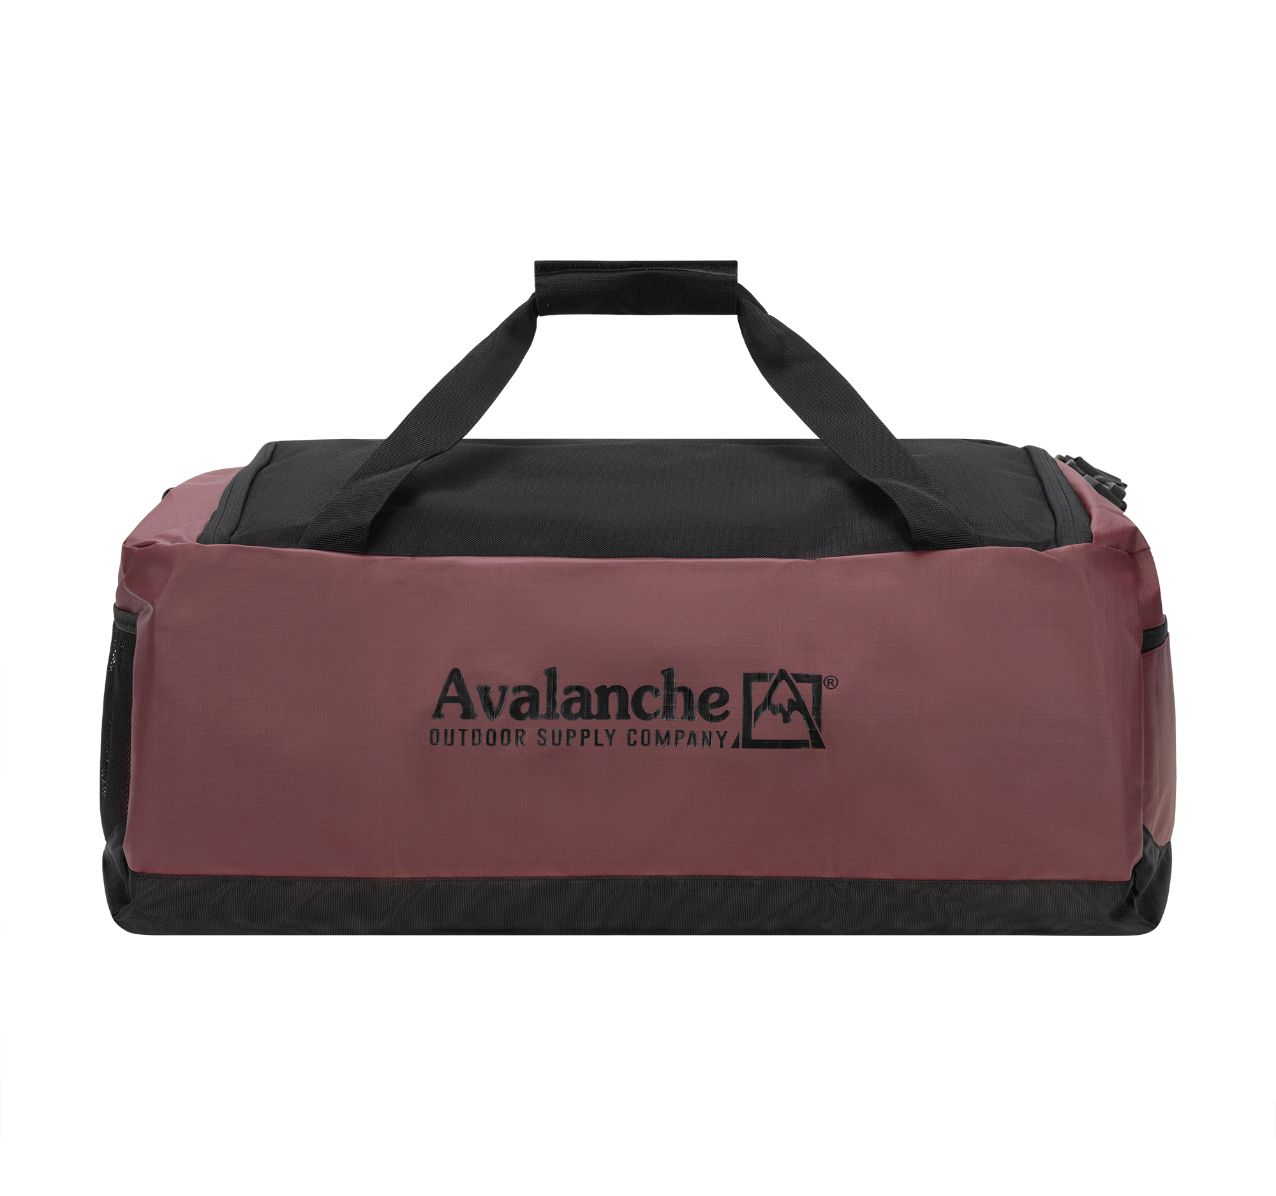 Avalanche Outdoor Supply